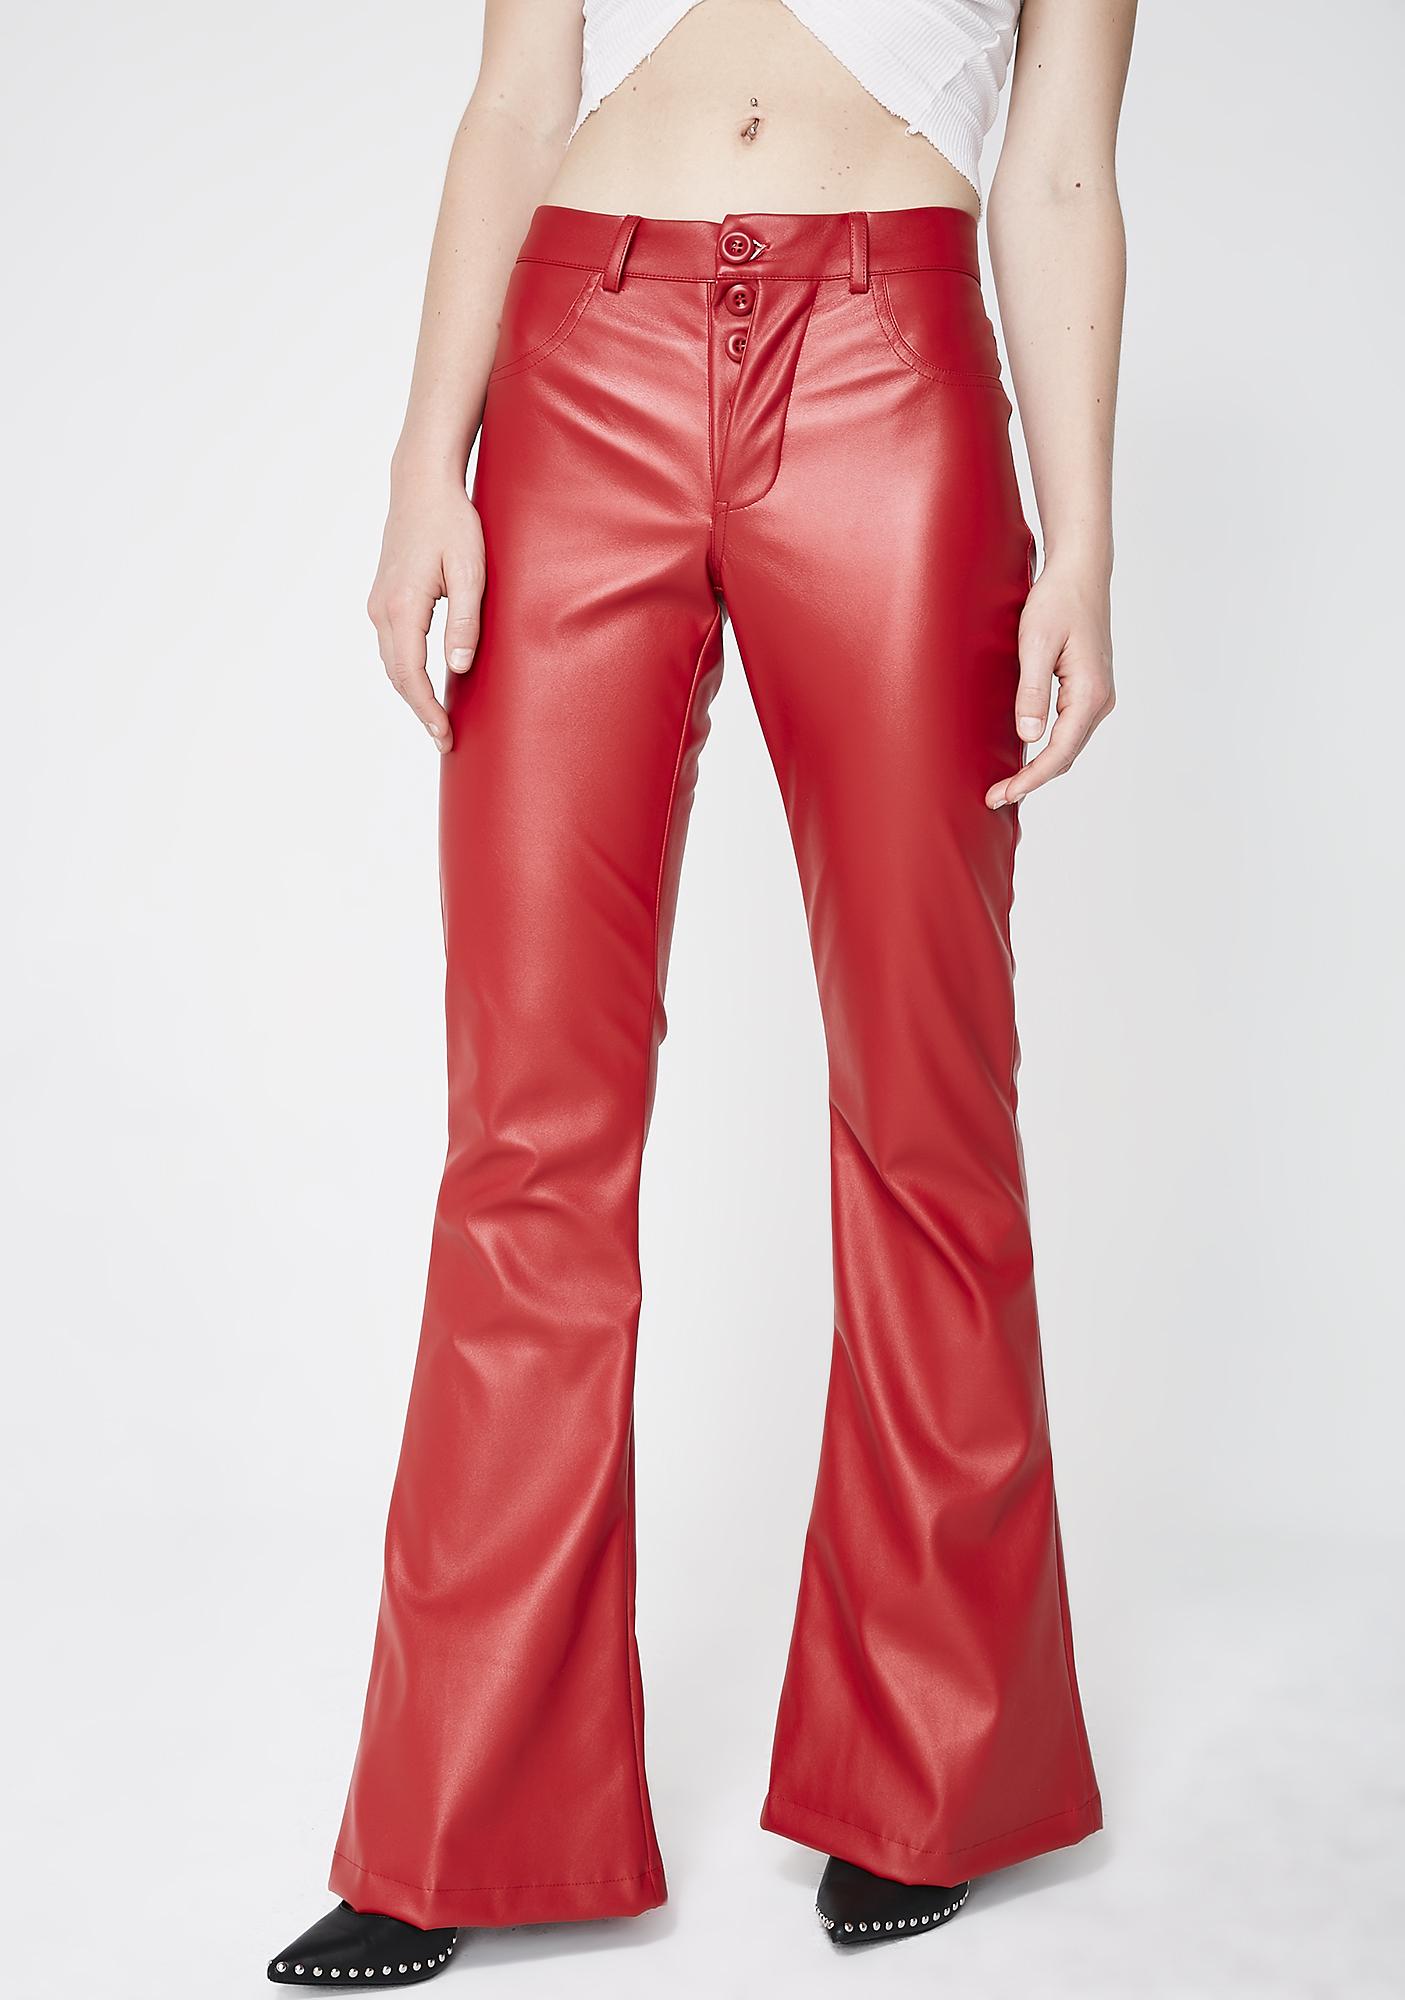 red flared pants